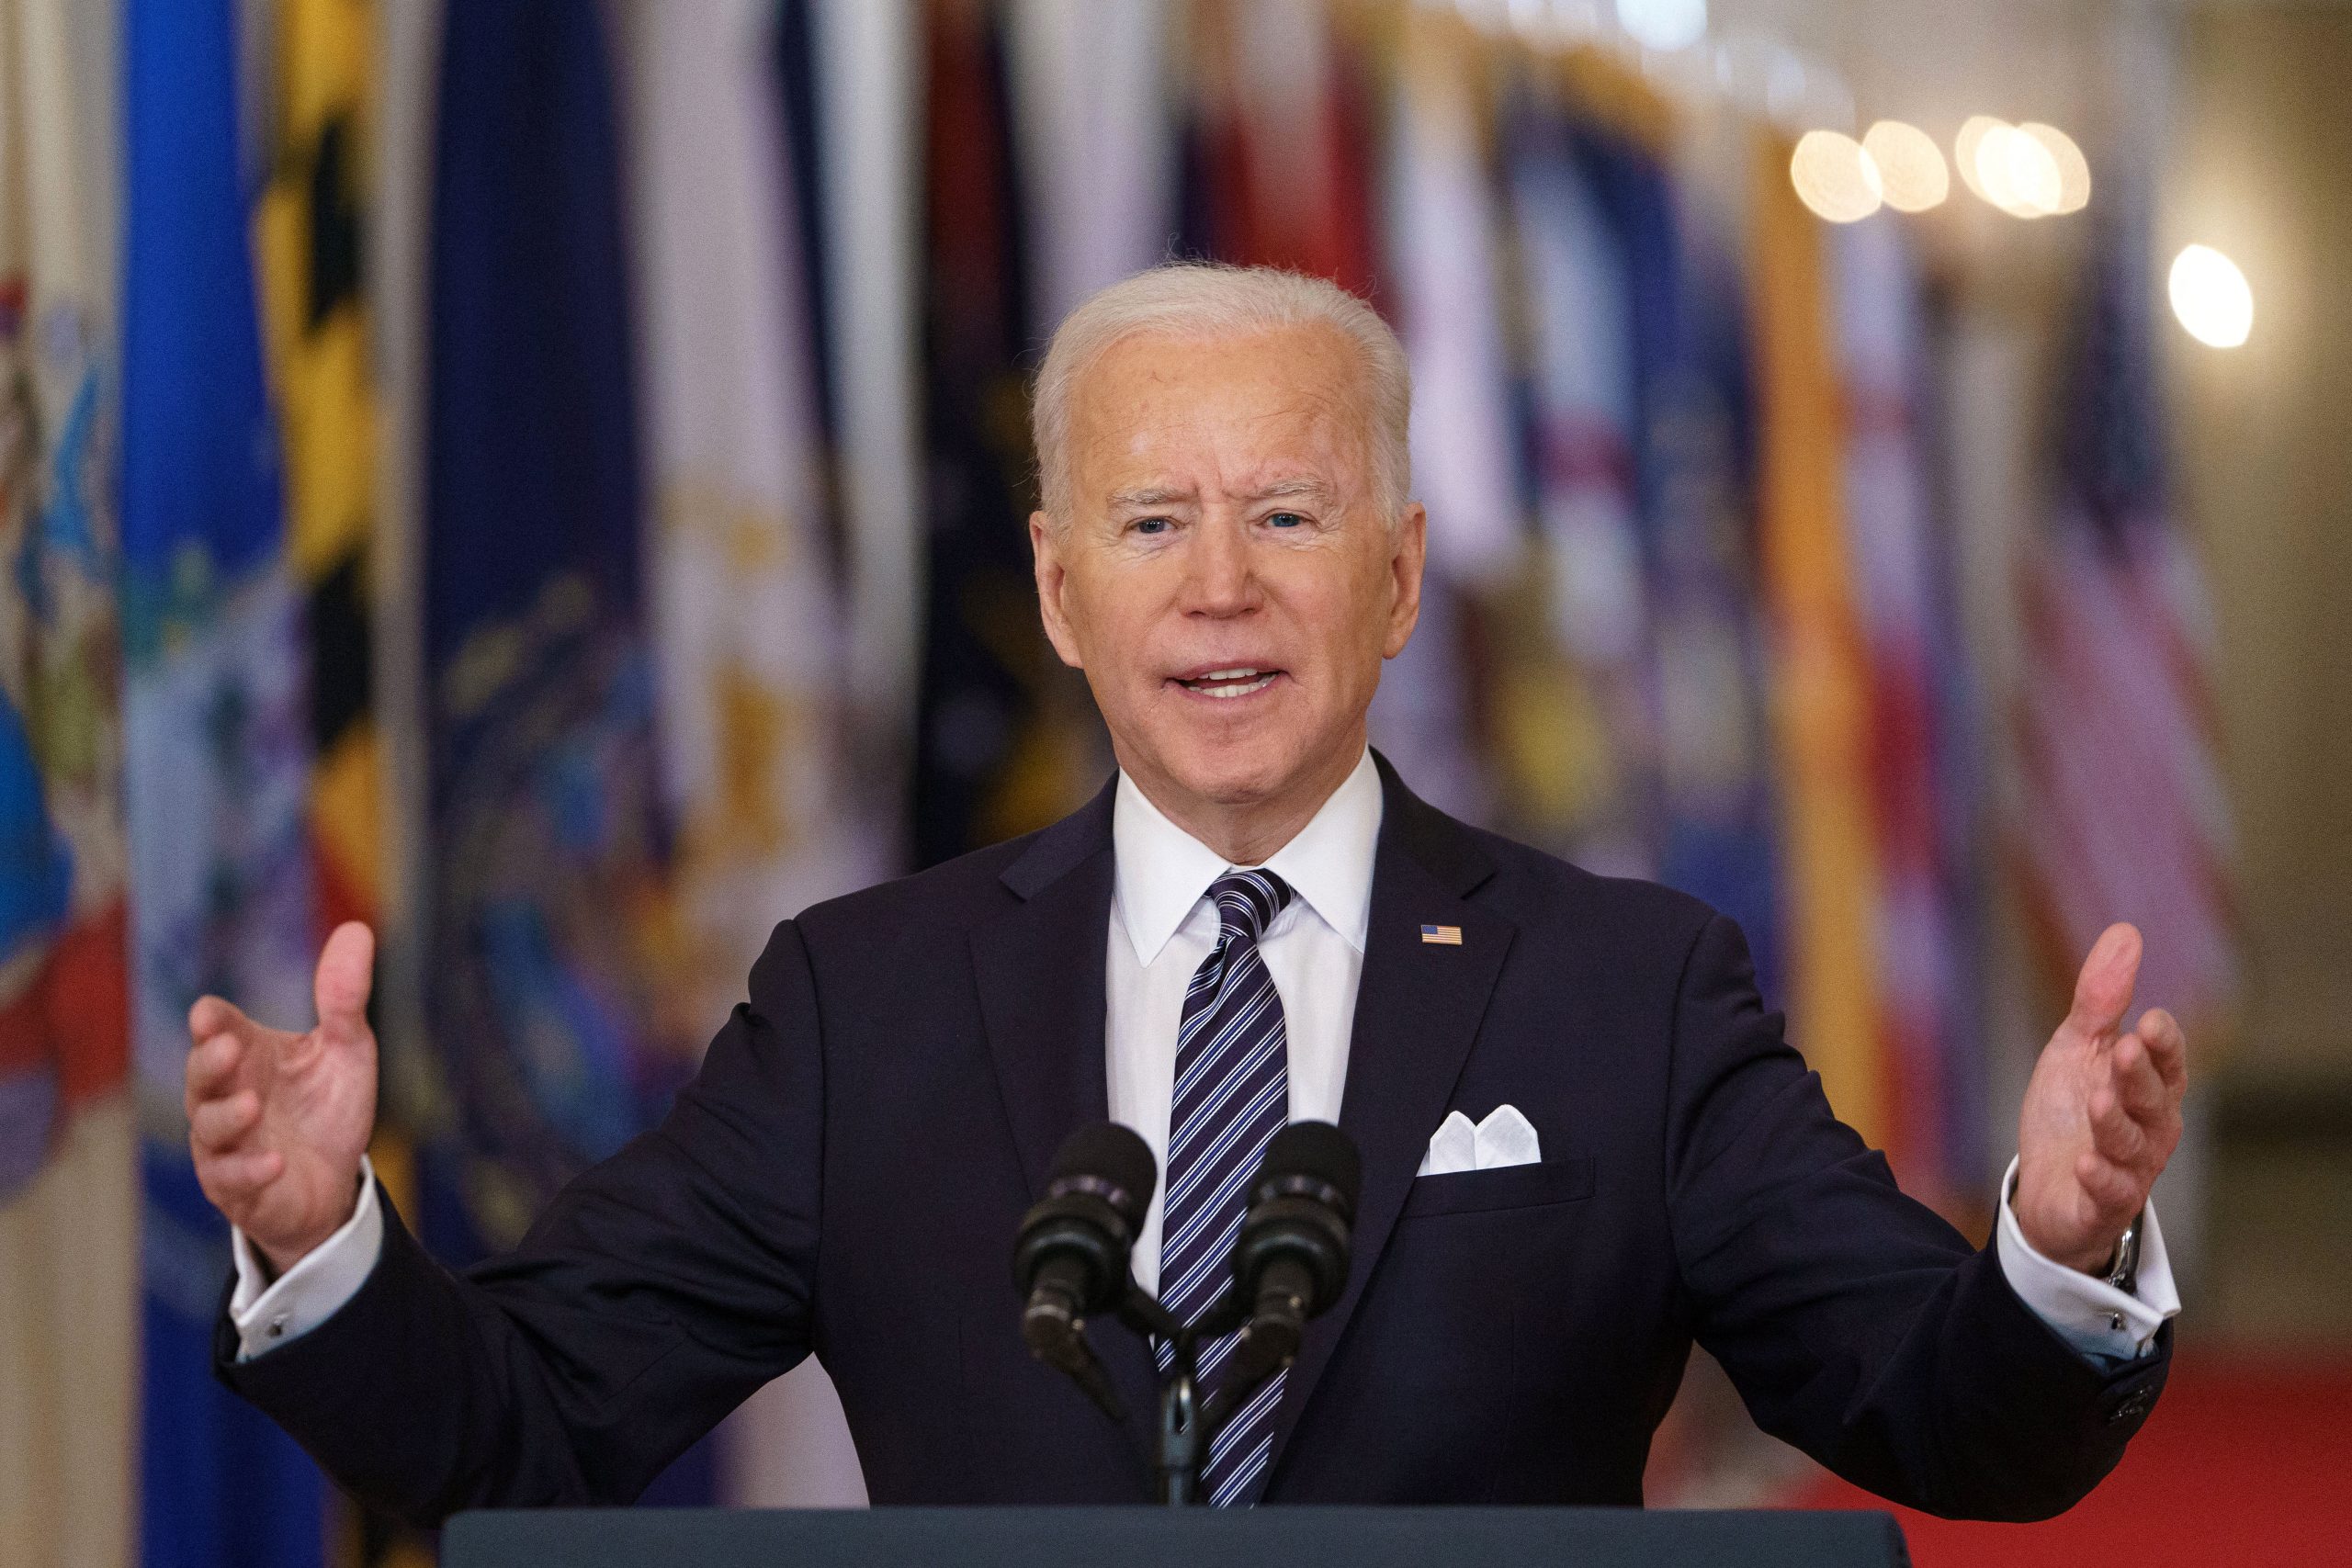 Free and open Indo-Pacific is essential for all: Joe Biden at Quad summit